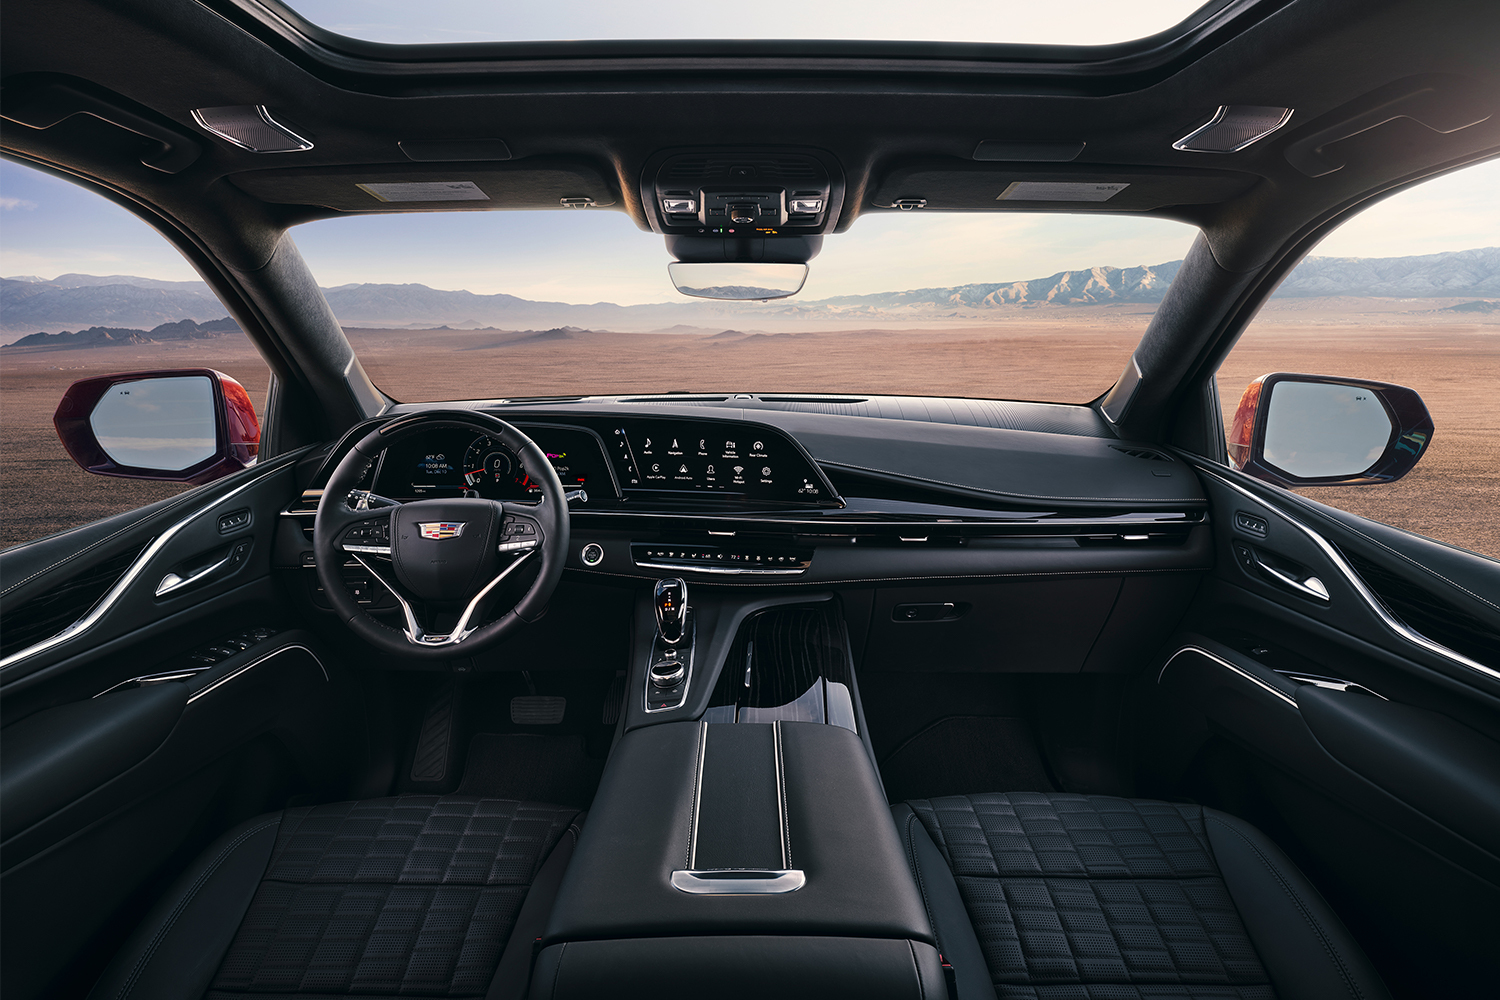 The generous interior of the 2023 Cadillac Escalade-V, showing the front two seats and the dashboard